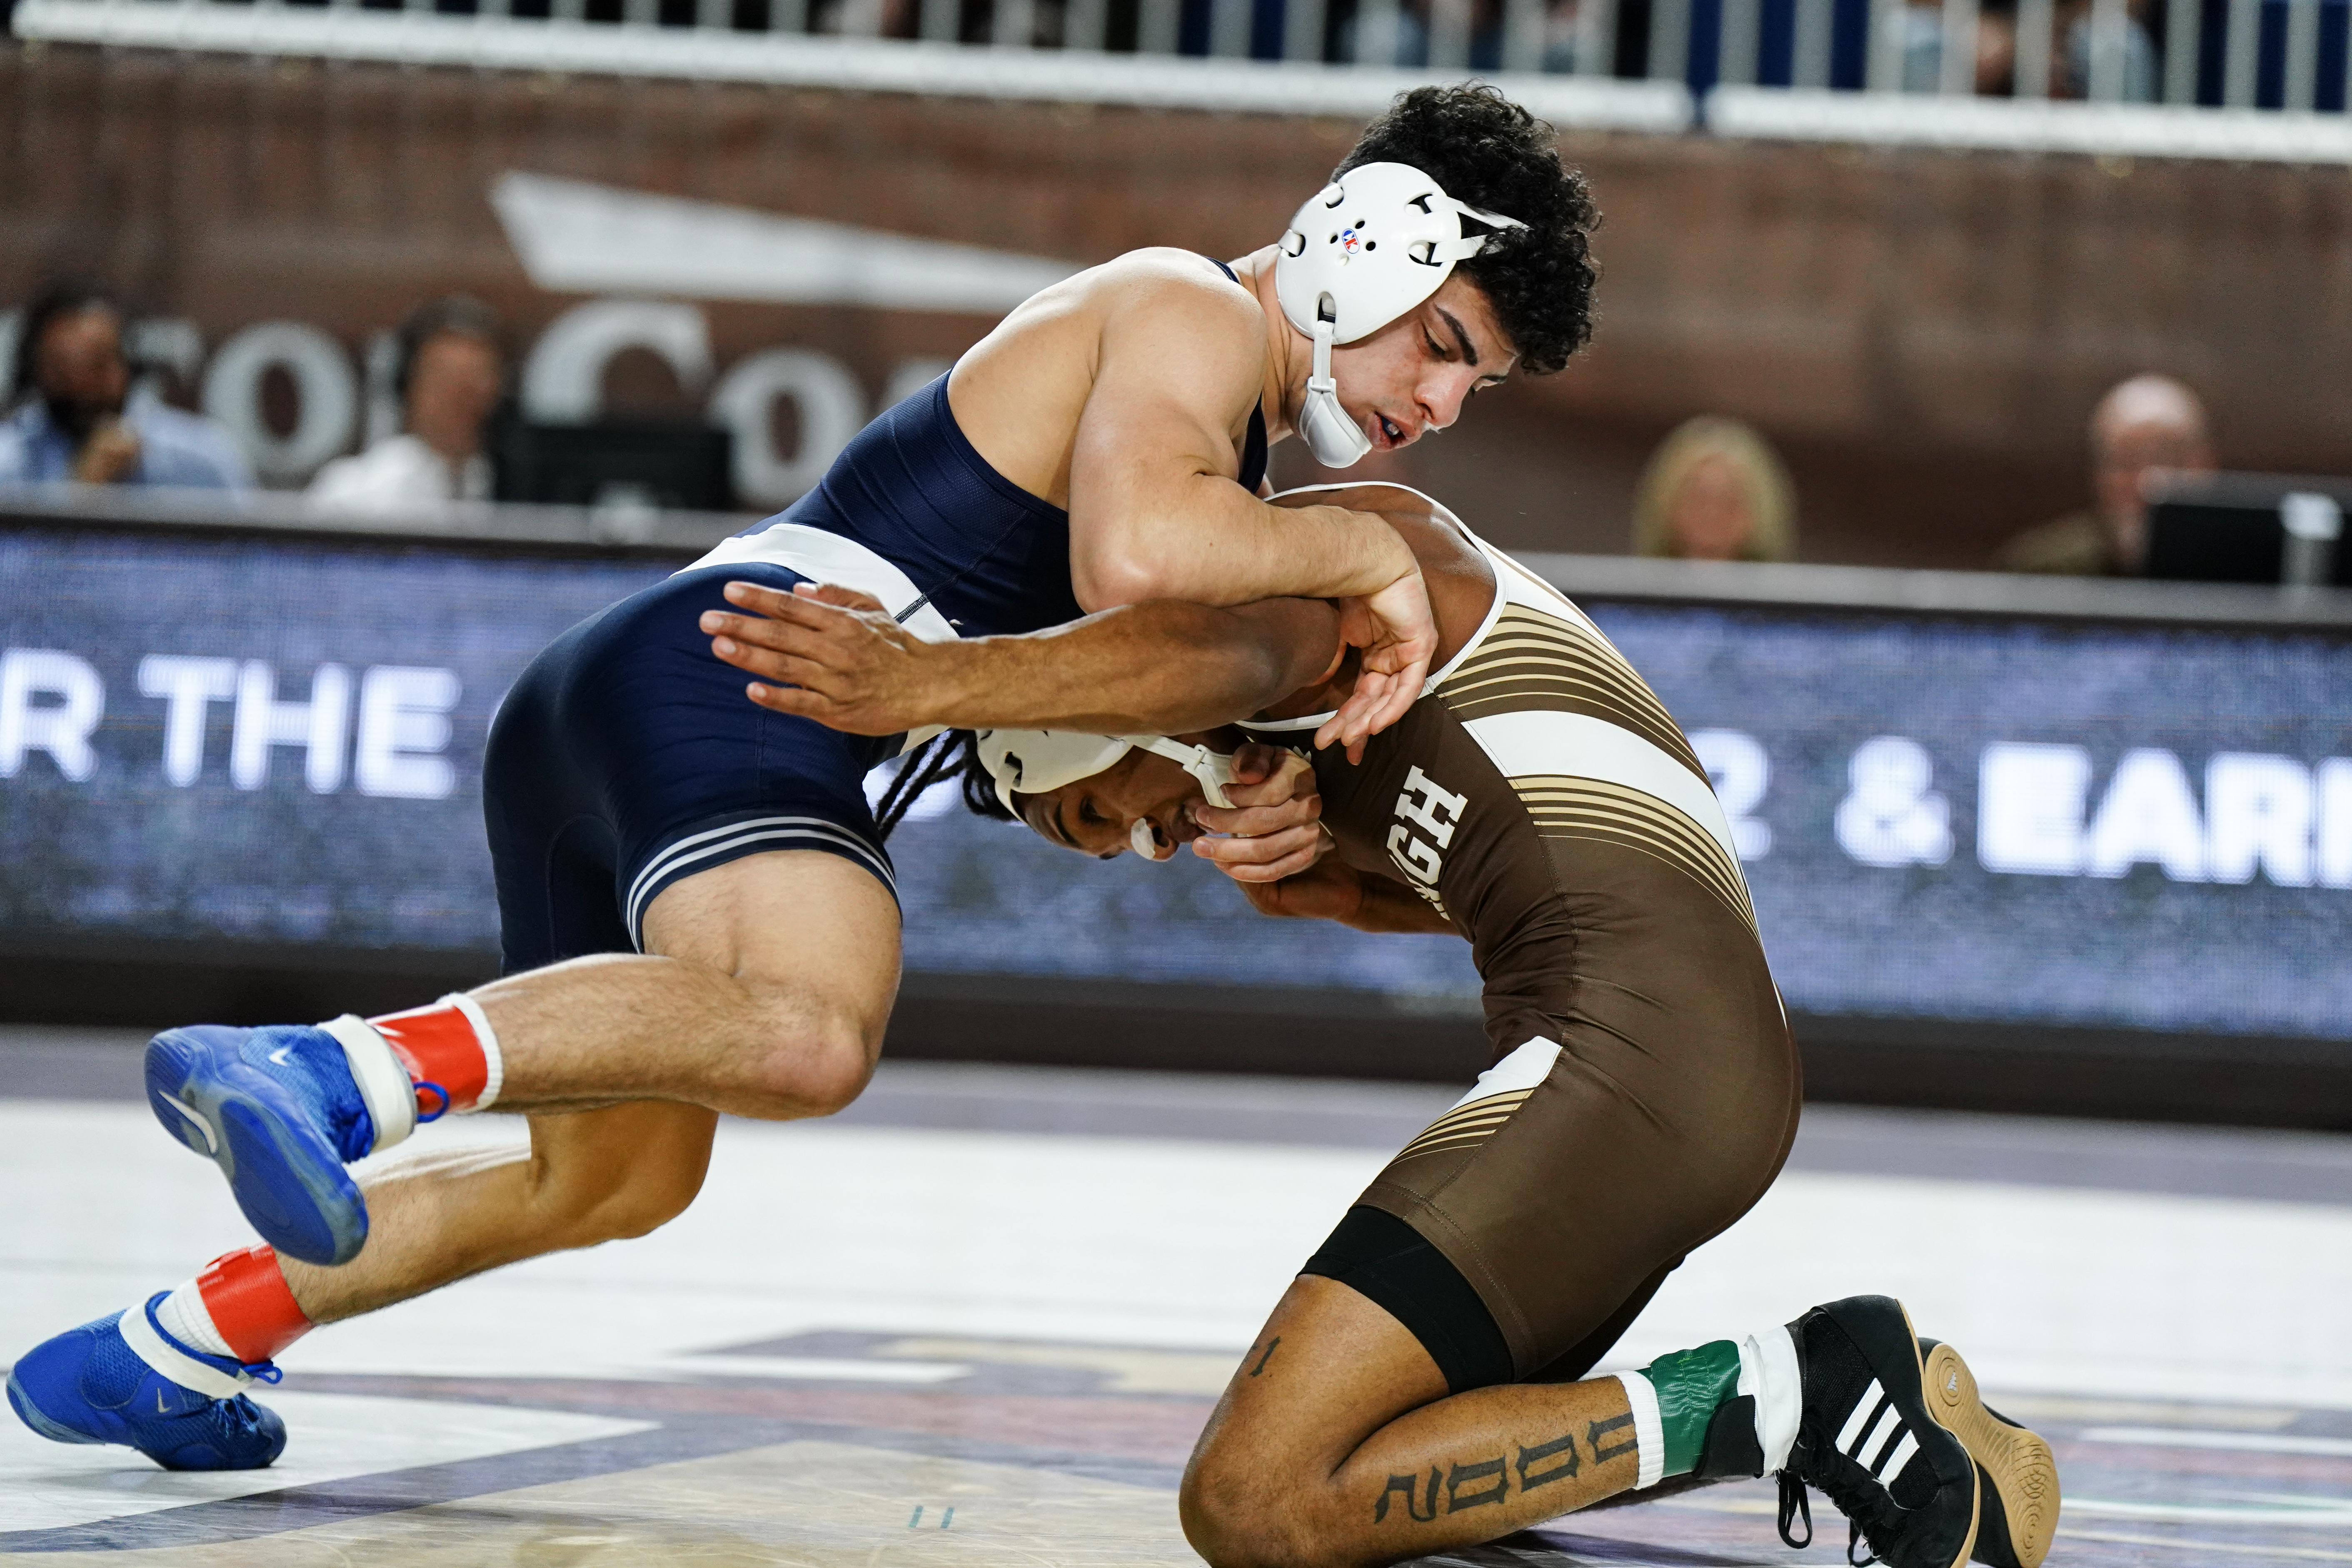 Is the Penn State-Iowa wrestling match available on TV and live stream?